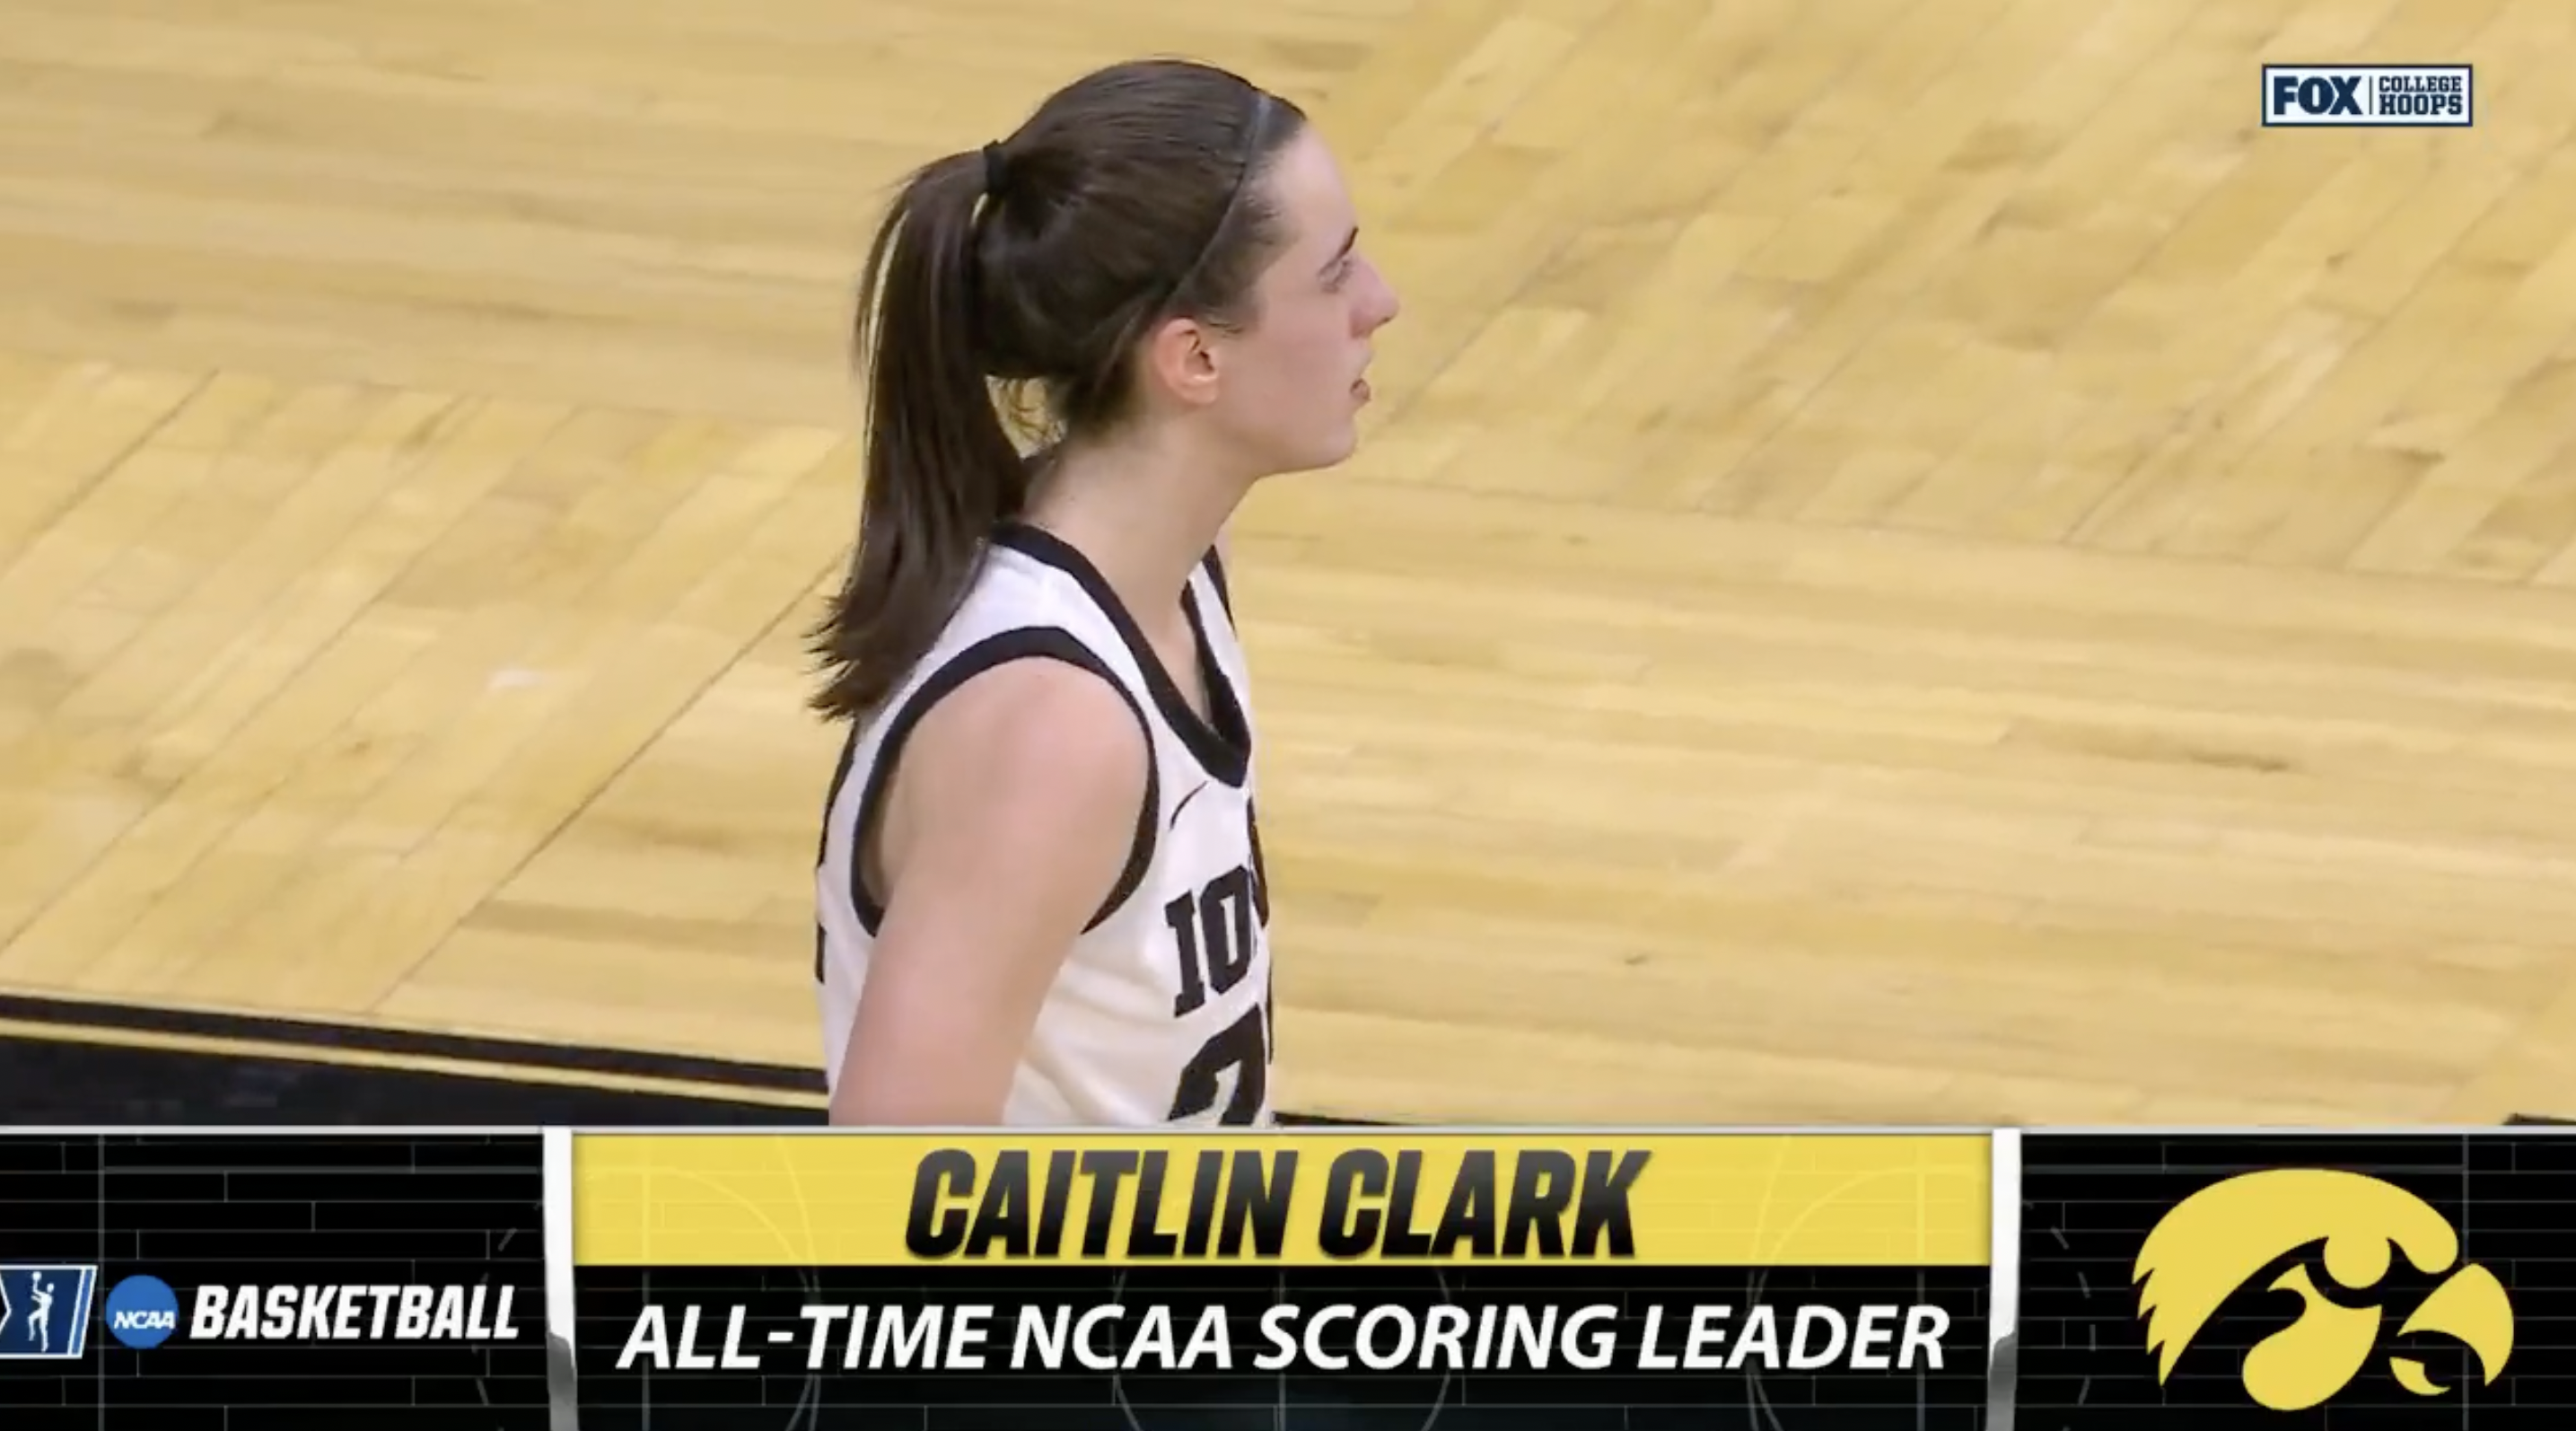 Caitlin Clark after making a free throw to break the NCAA scoring record.